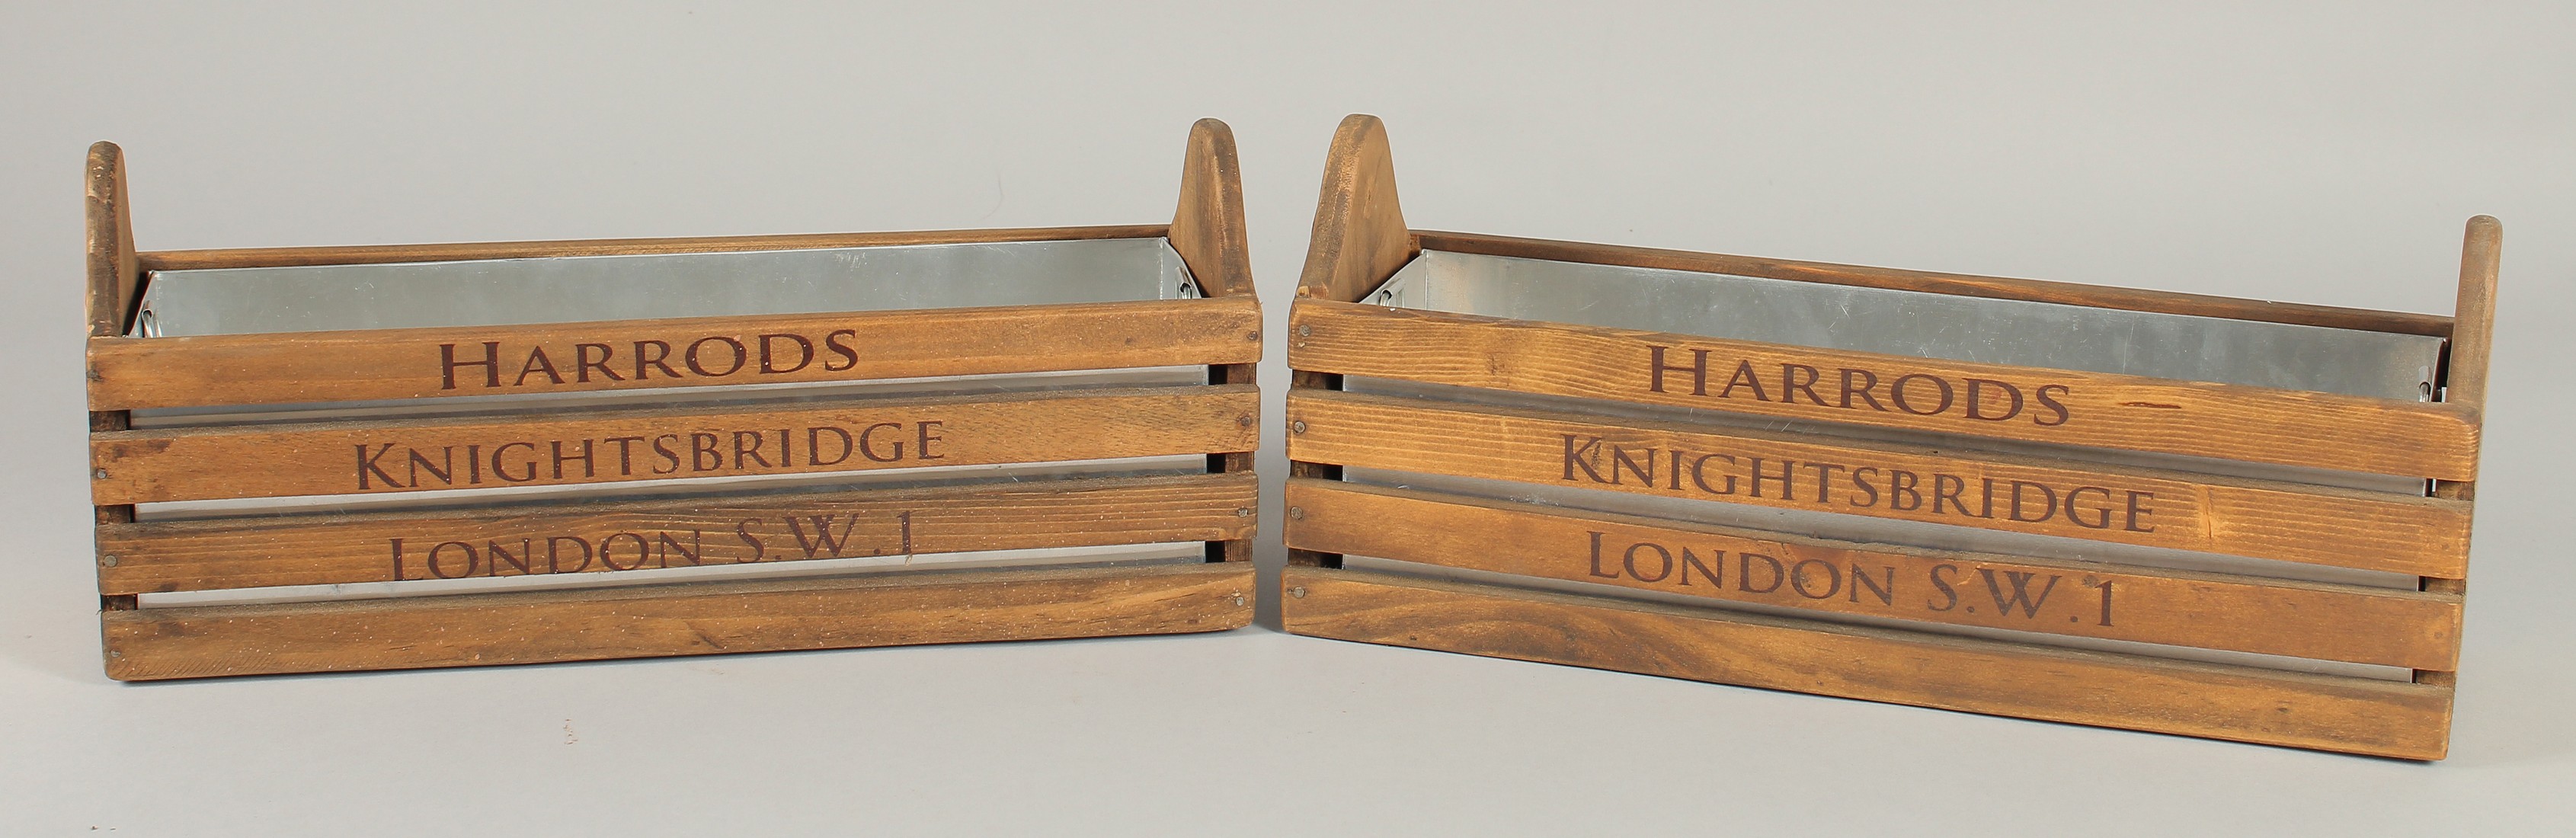 A SMALL PAIR OF "HARRODS" WOODEN BOXES. 1ft 2ins long with wooden liners.